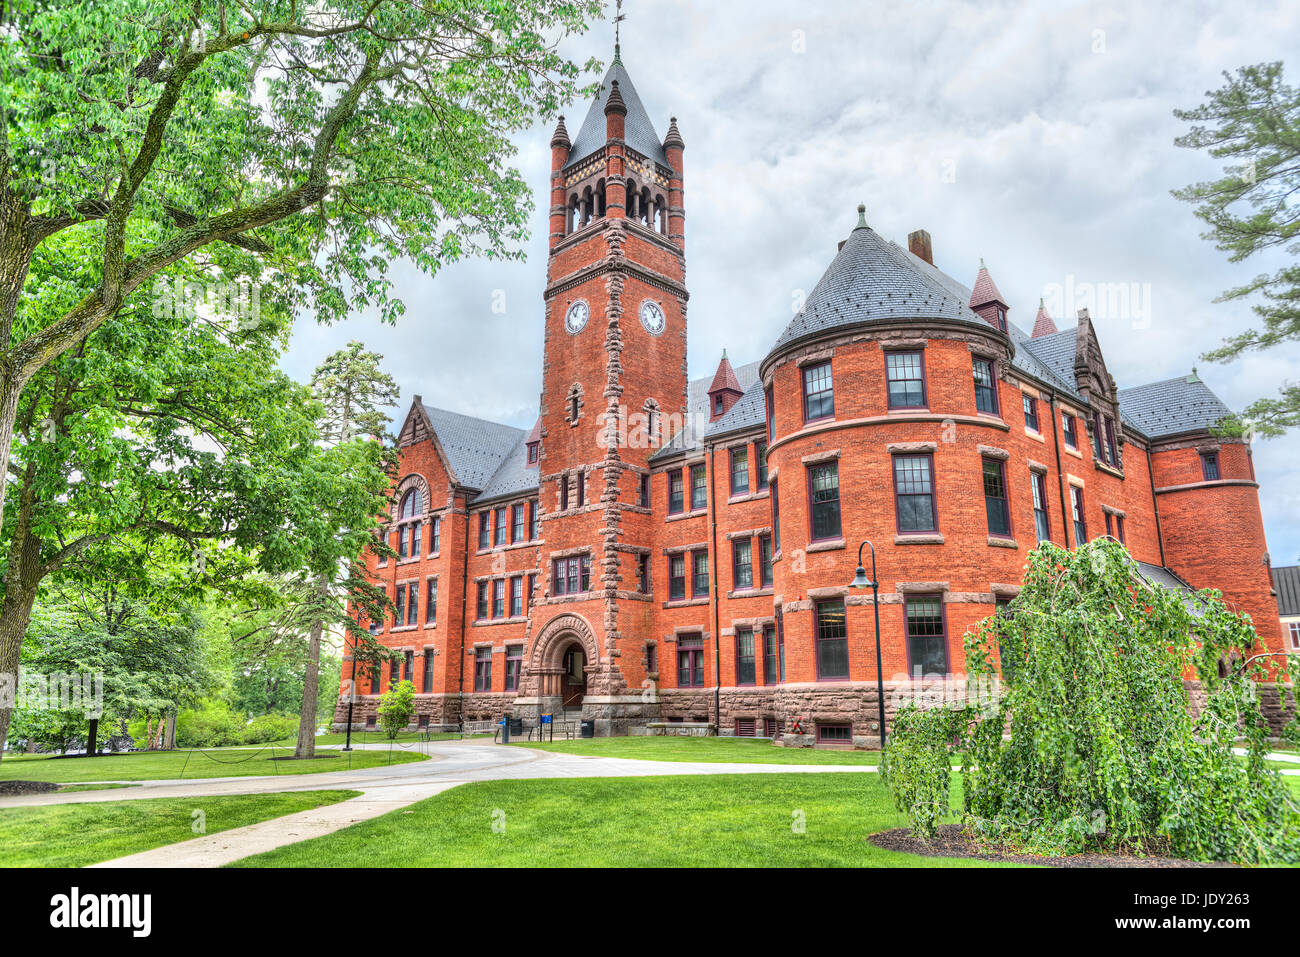 Gettysburg, USA - May 24, 2017: Glatfelter Hall, Gettysburg College red brick building with cloudy sky and clock Stock Photo